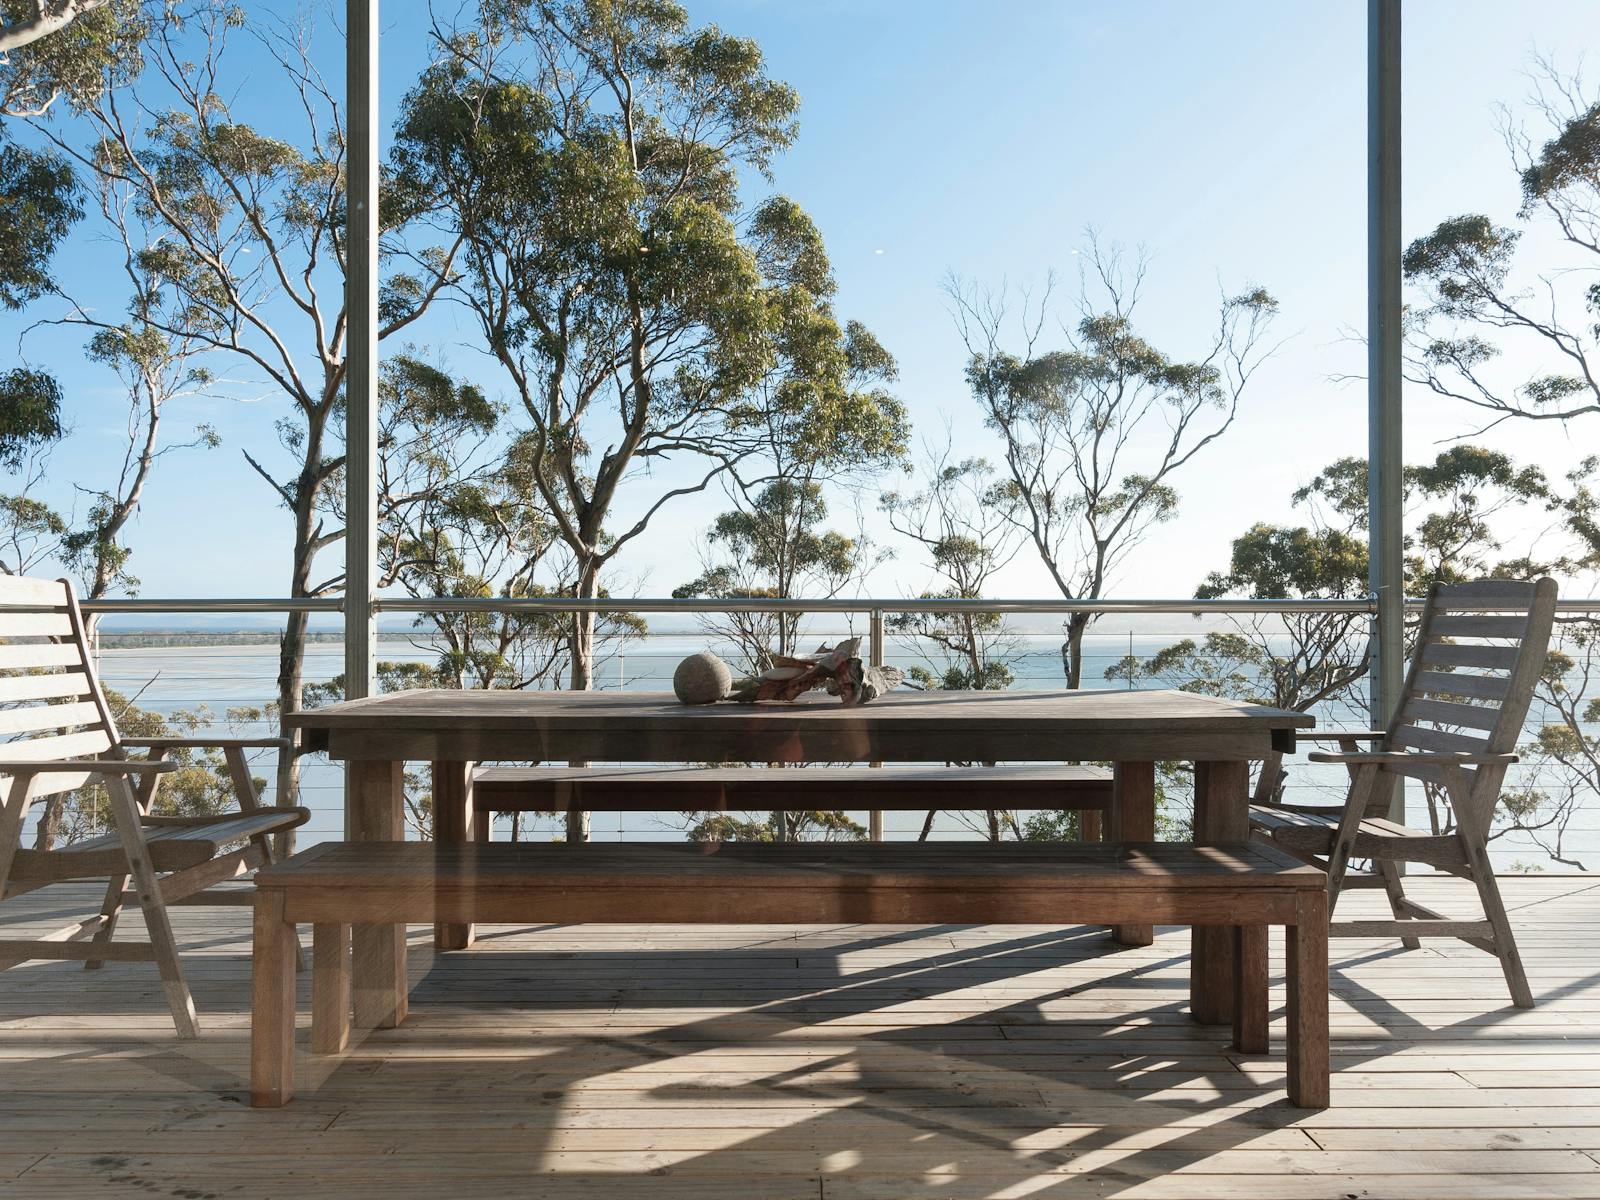 Enjoy an alfresco meal overlooking the water. What better way to enjoy Tasmania's fabulous produce.